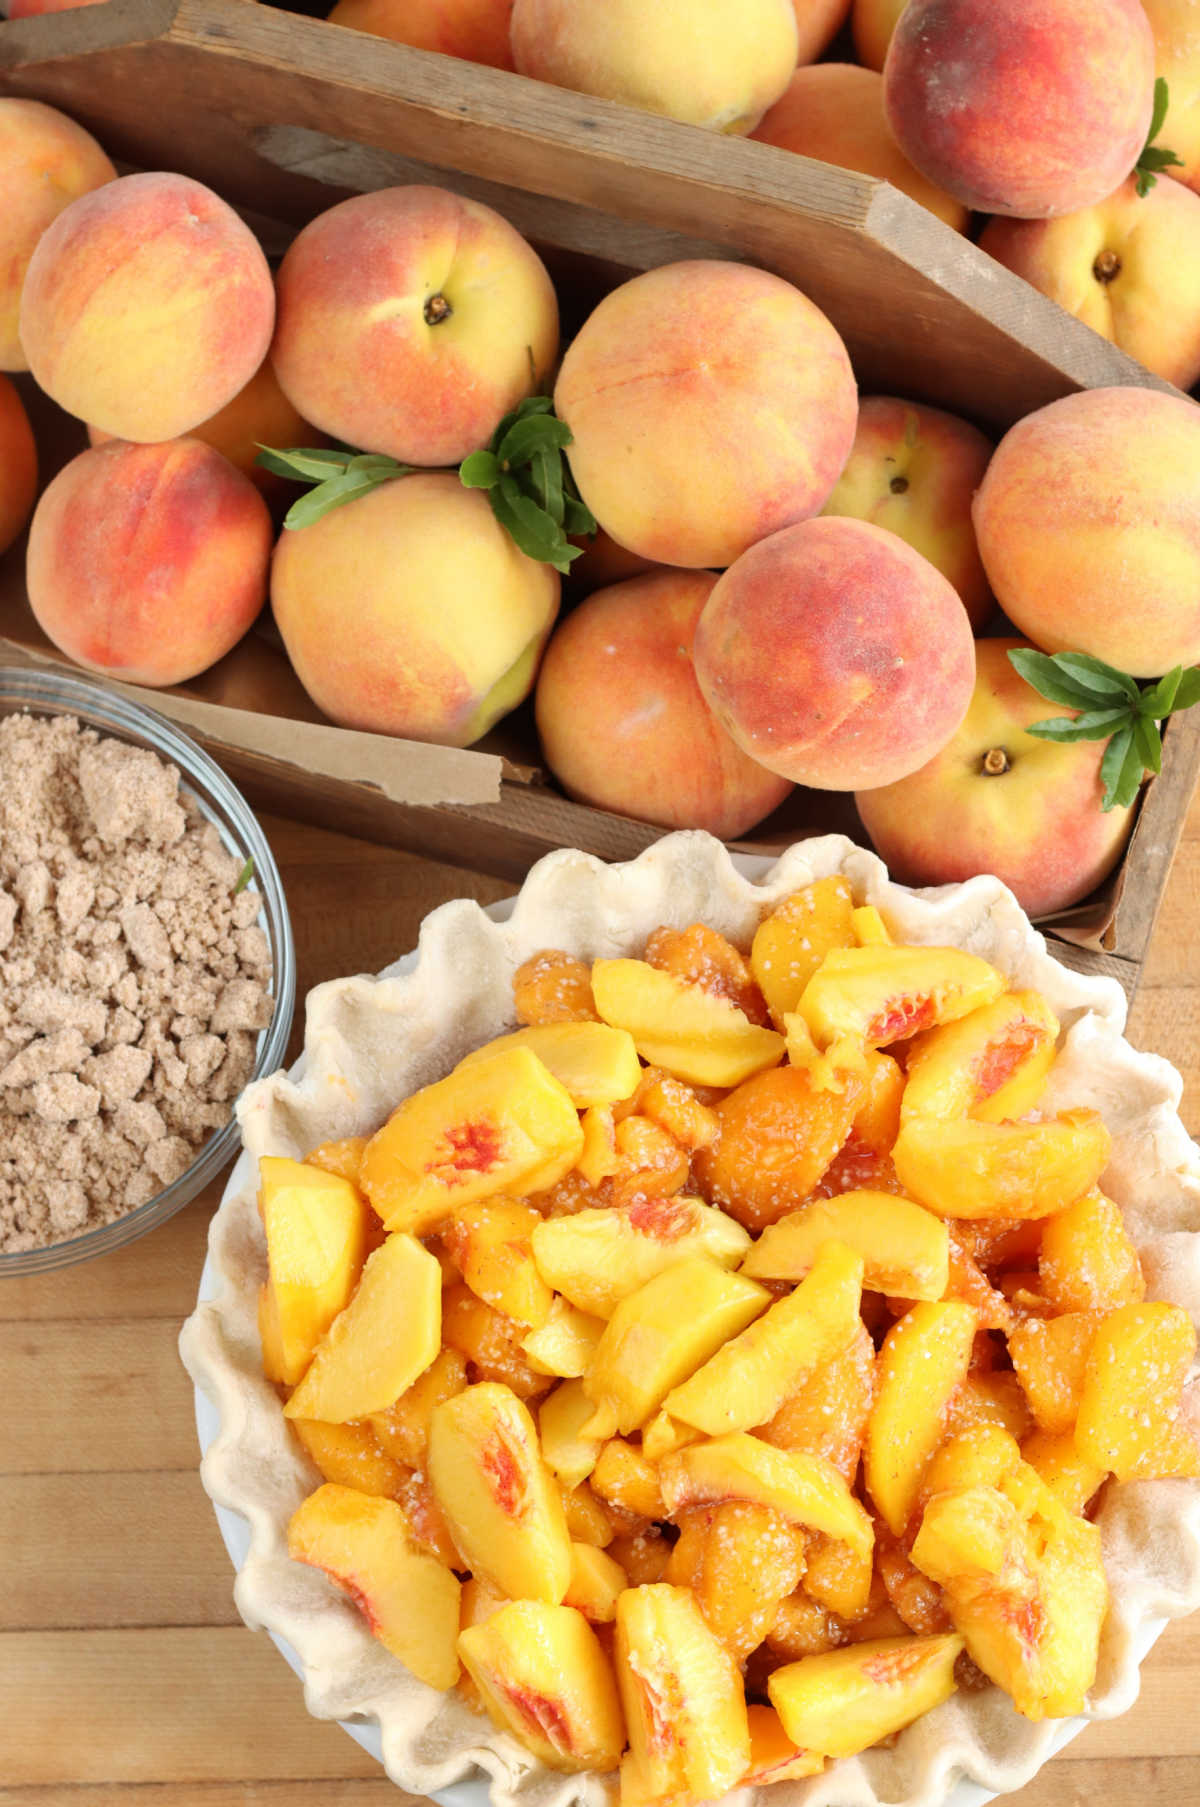 Peaches in wood box, peach slices in unbaked pie shell on butcher block.